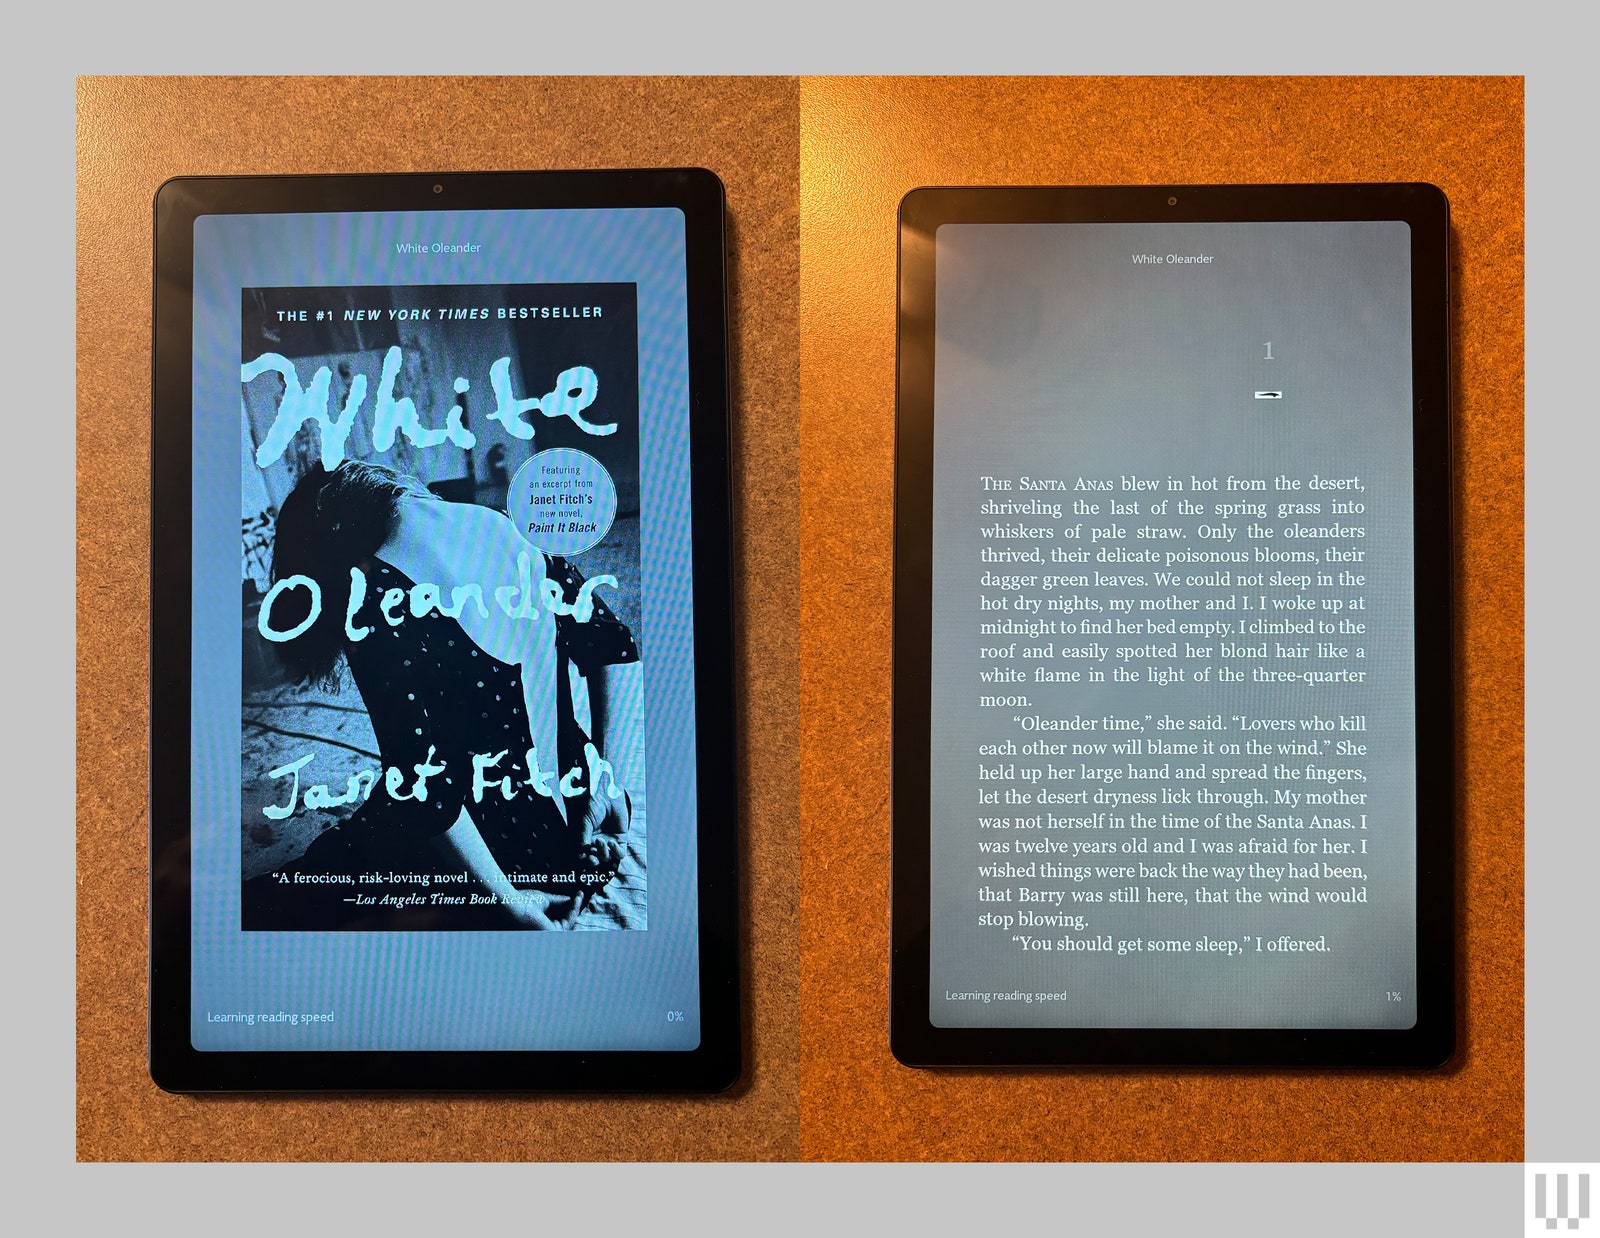 Tablet showing the cover of an ebook on the left and a page from the ebook on the right